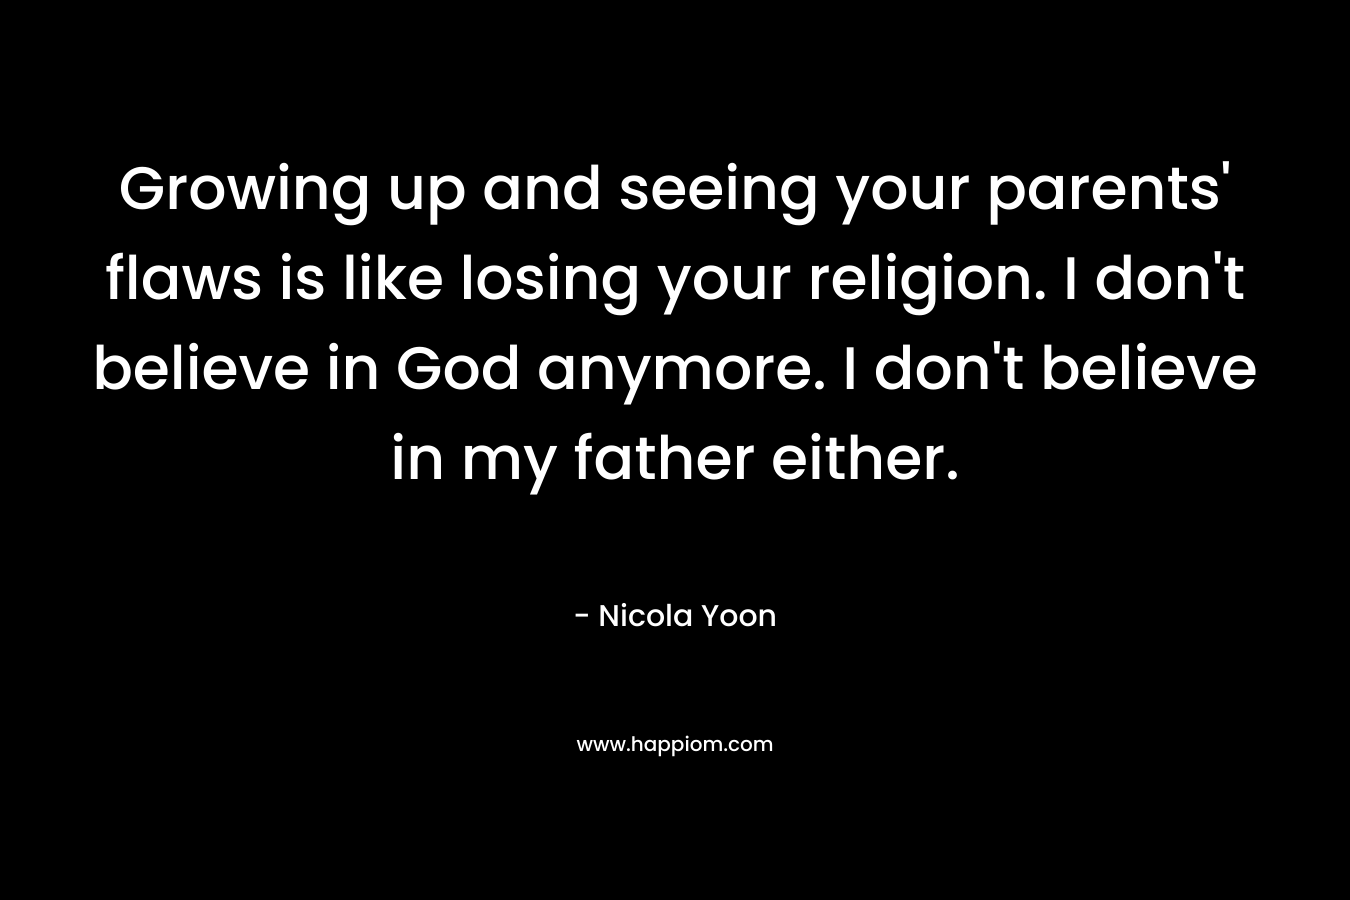 Growing up and seeing your parents' flaws is like losing your religion. I don't believe in God anymore. I don't believe in my father either.